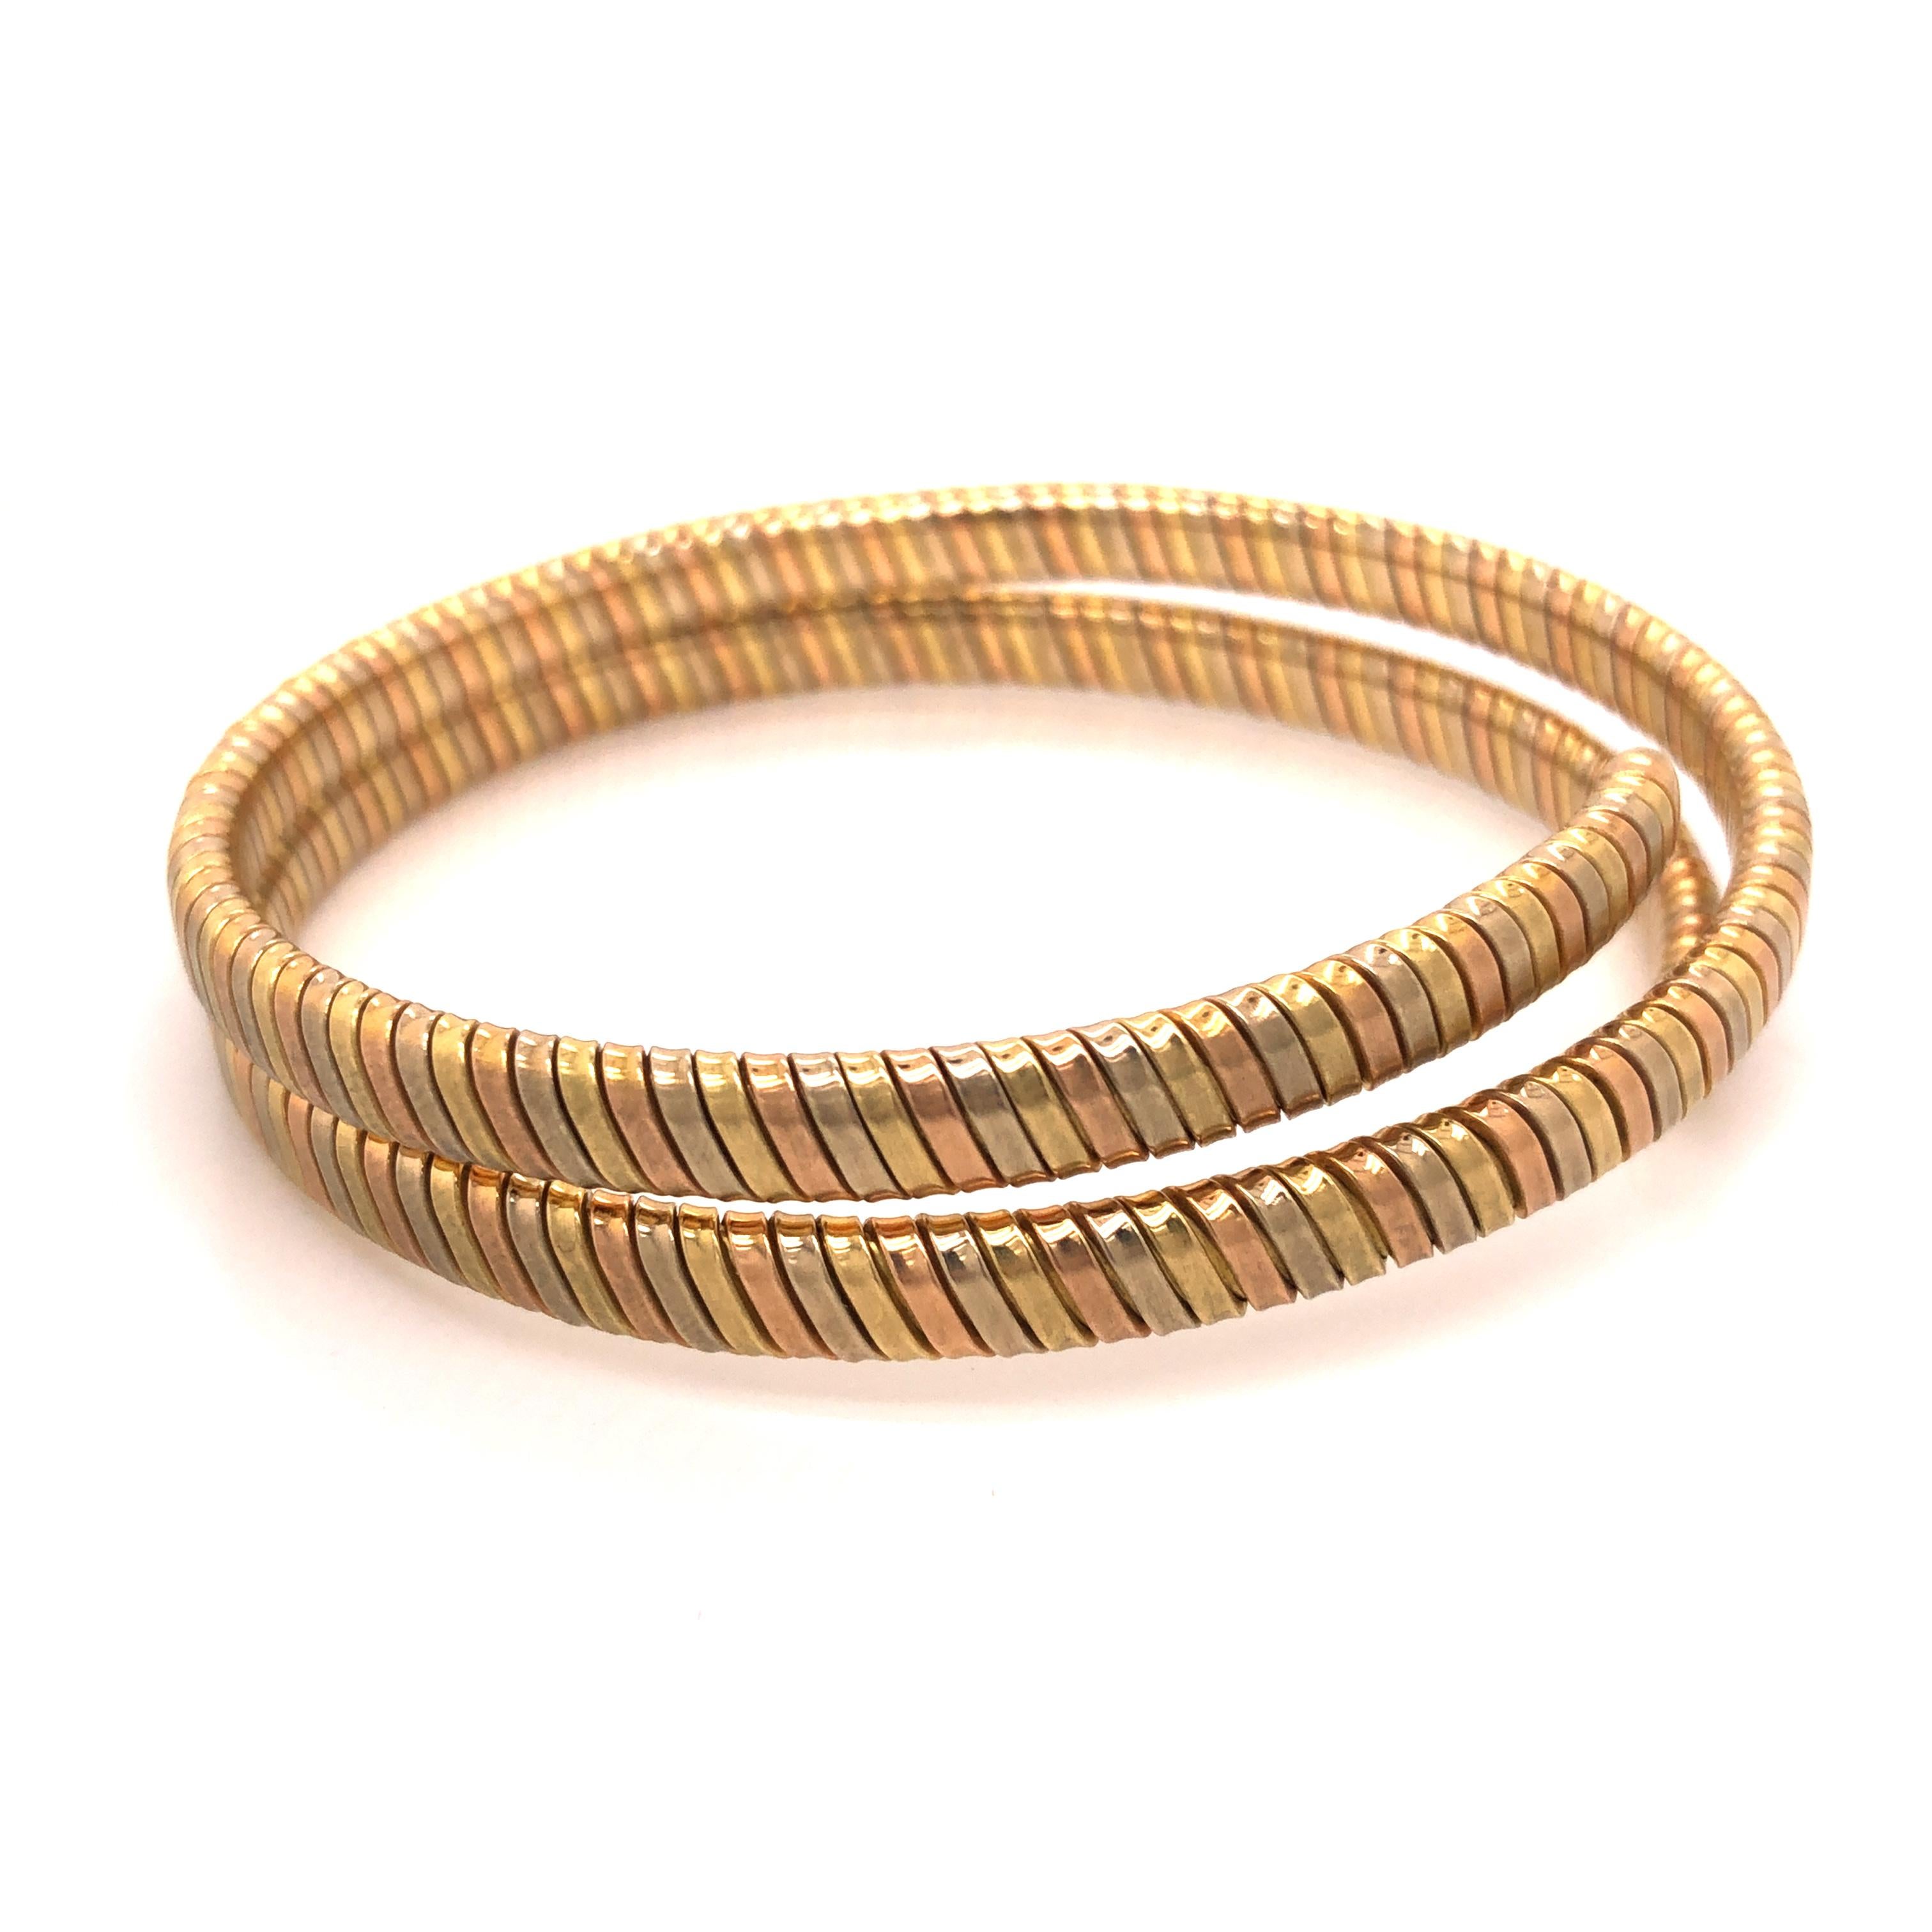 A vintage spiral flexible Italian bangle bracelet crafted from yellow, white, and rose gold. The bracelet has a matte finish on the outside and plotted finish on the inside. Marked 750 and having Italian maker's mark 740 VI corresponding to Essepi